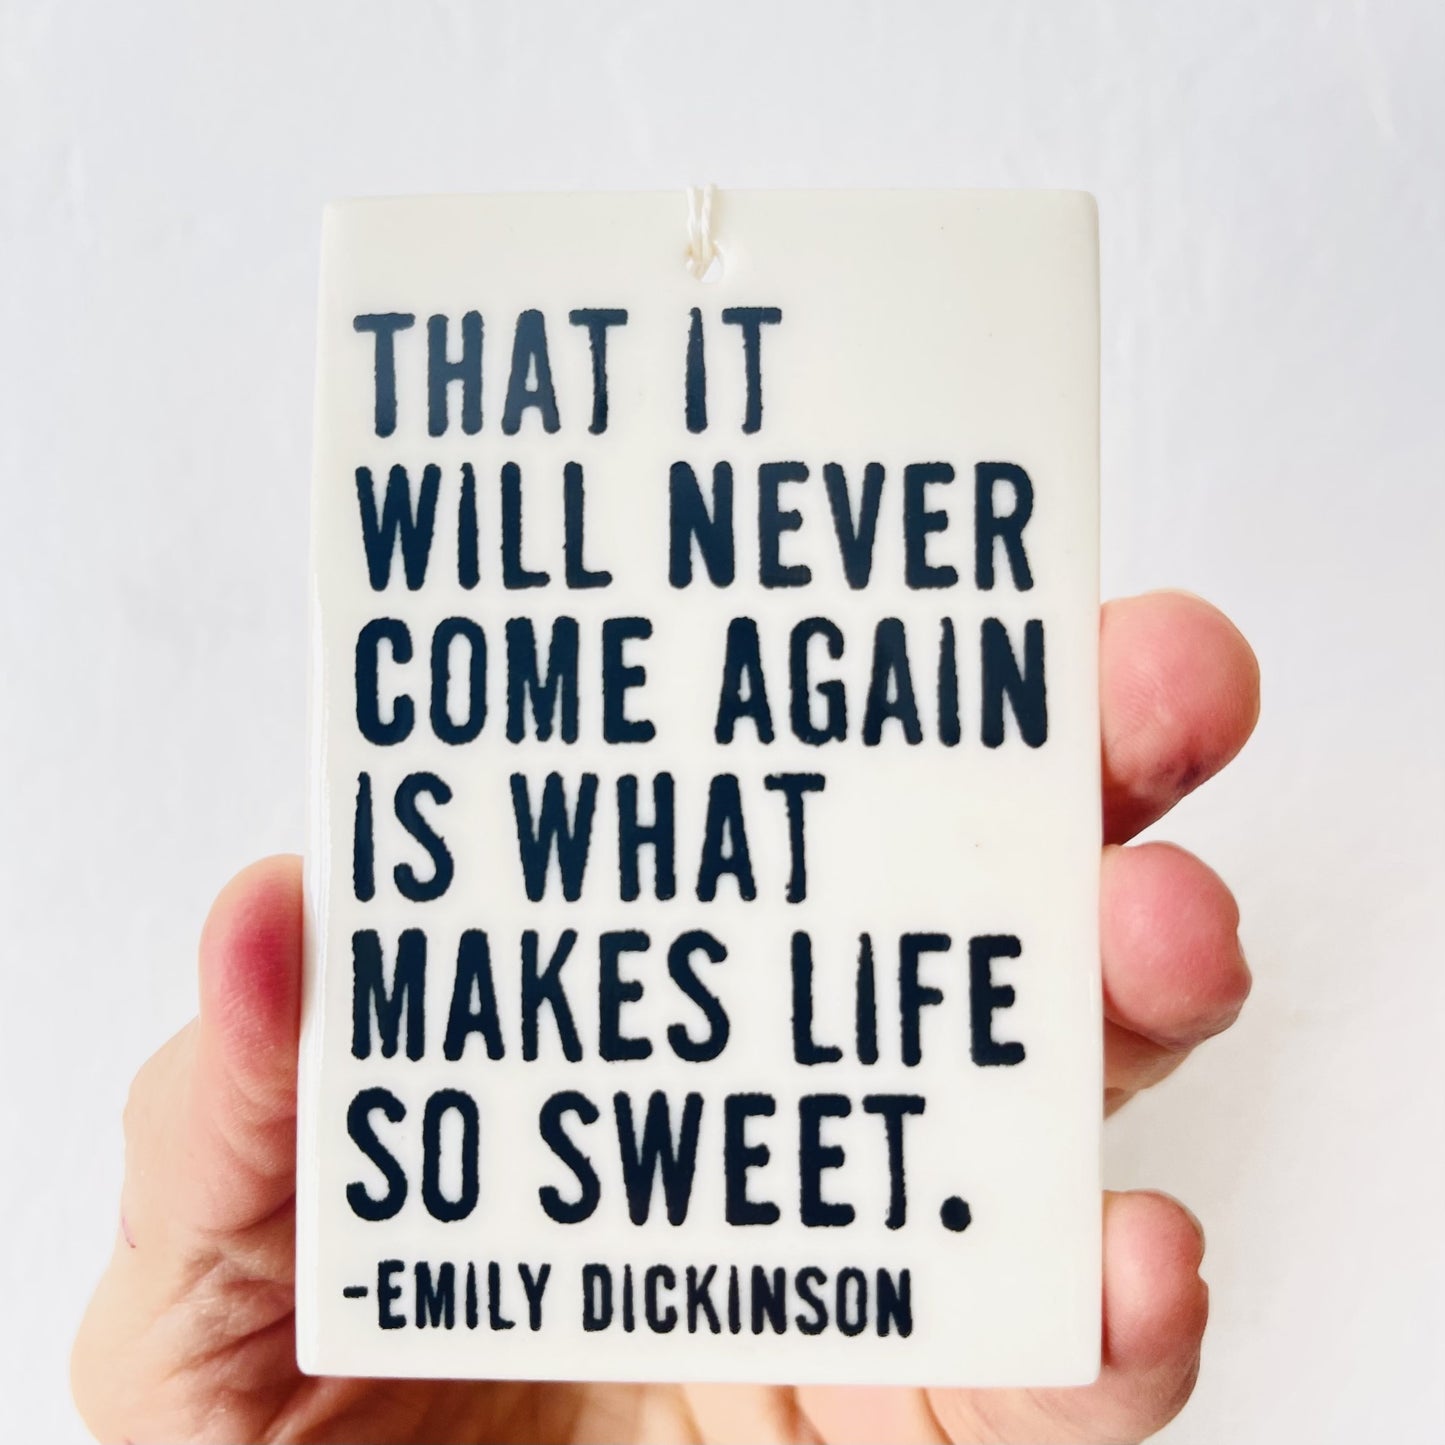 emily dickinson quote ceramic wall tag